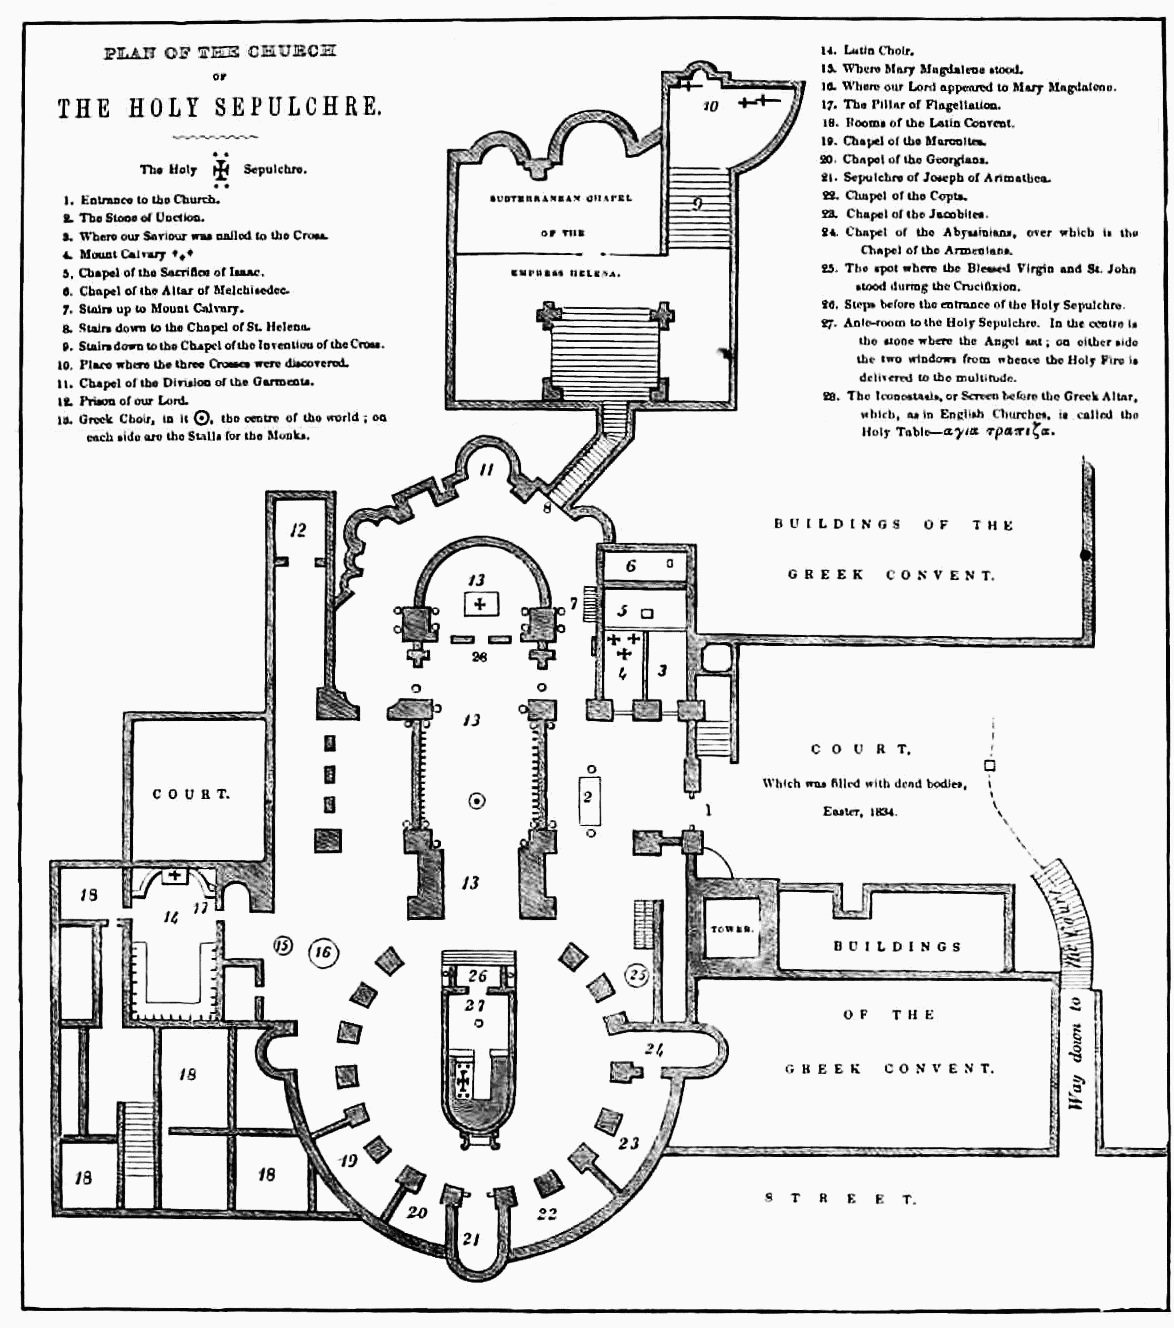 Plan of the church of the The Holy Sepulchre.